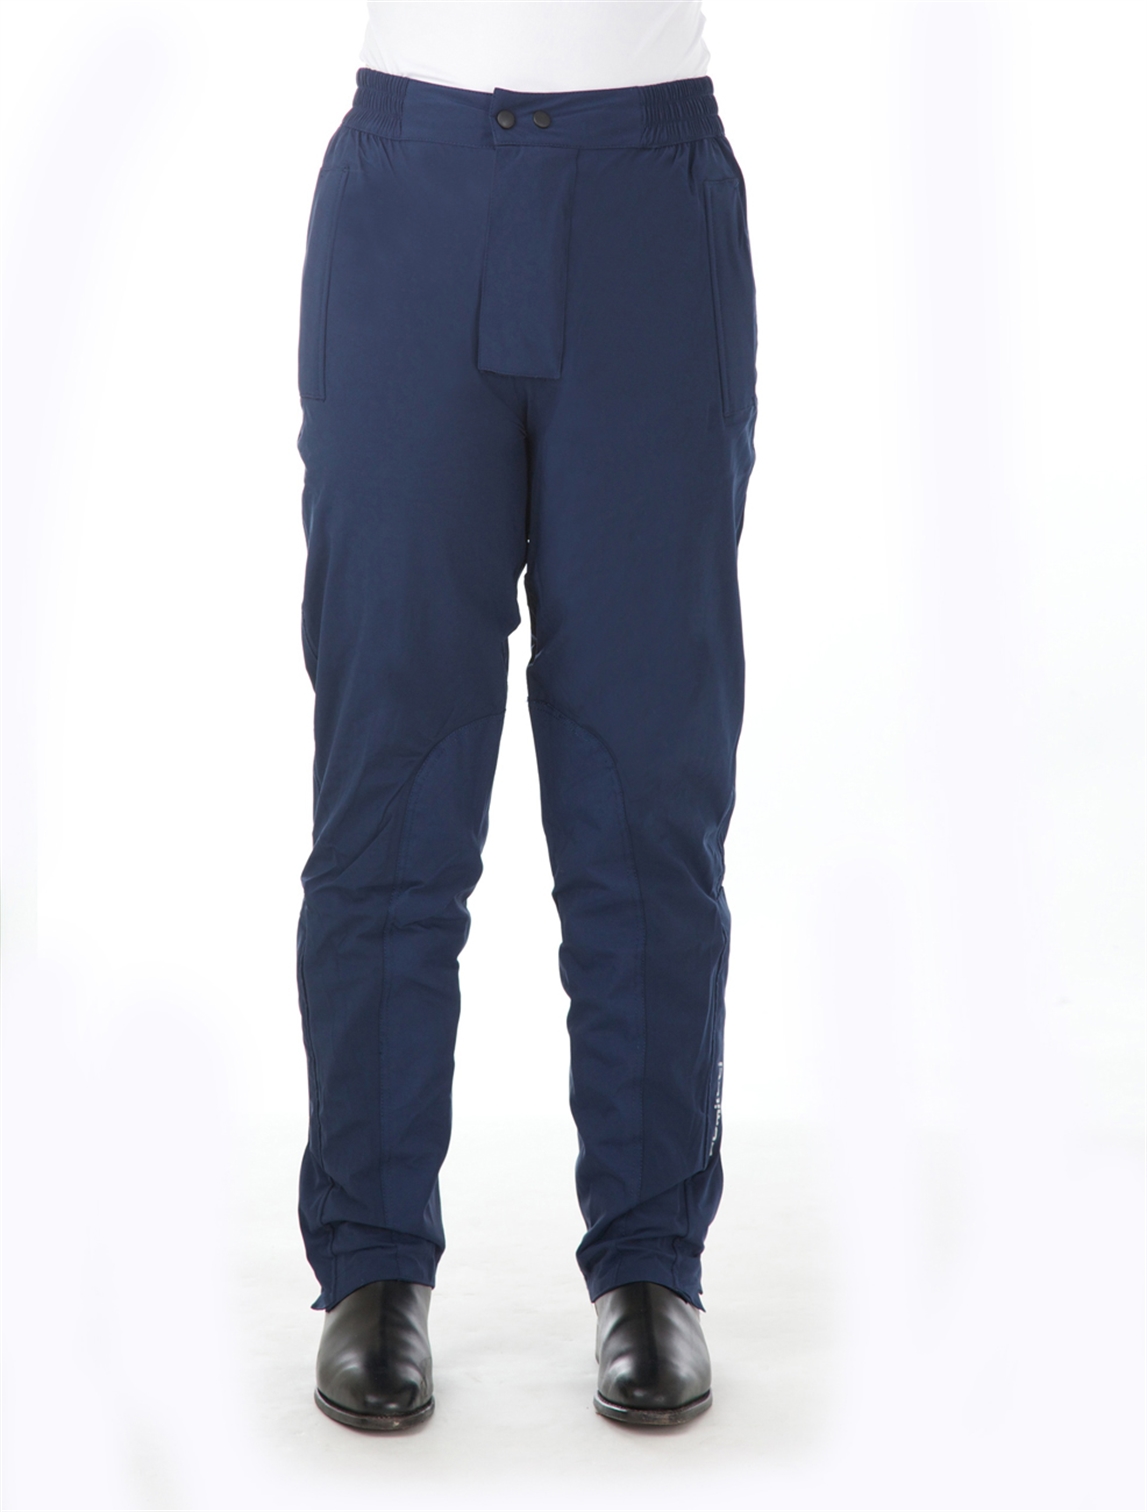 Aubrion Core Waterproof Trousers  Unisex  Saddles and Style